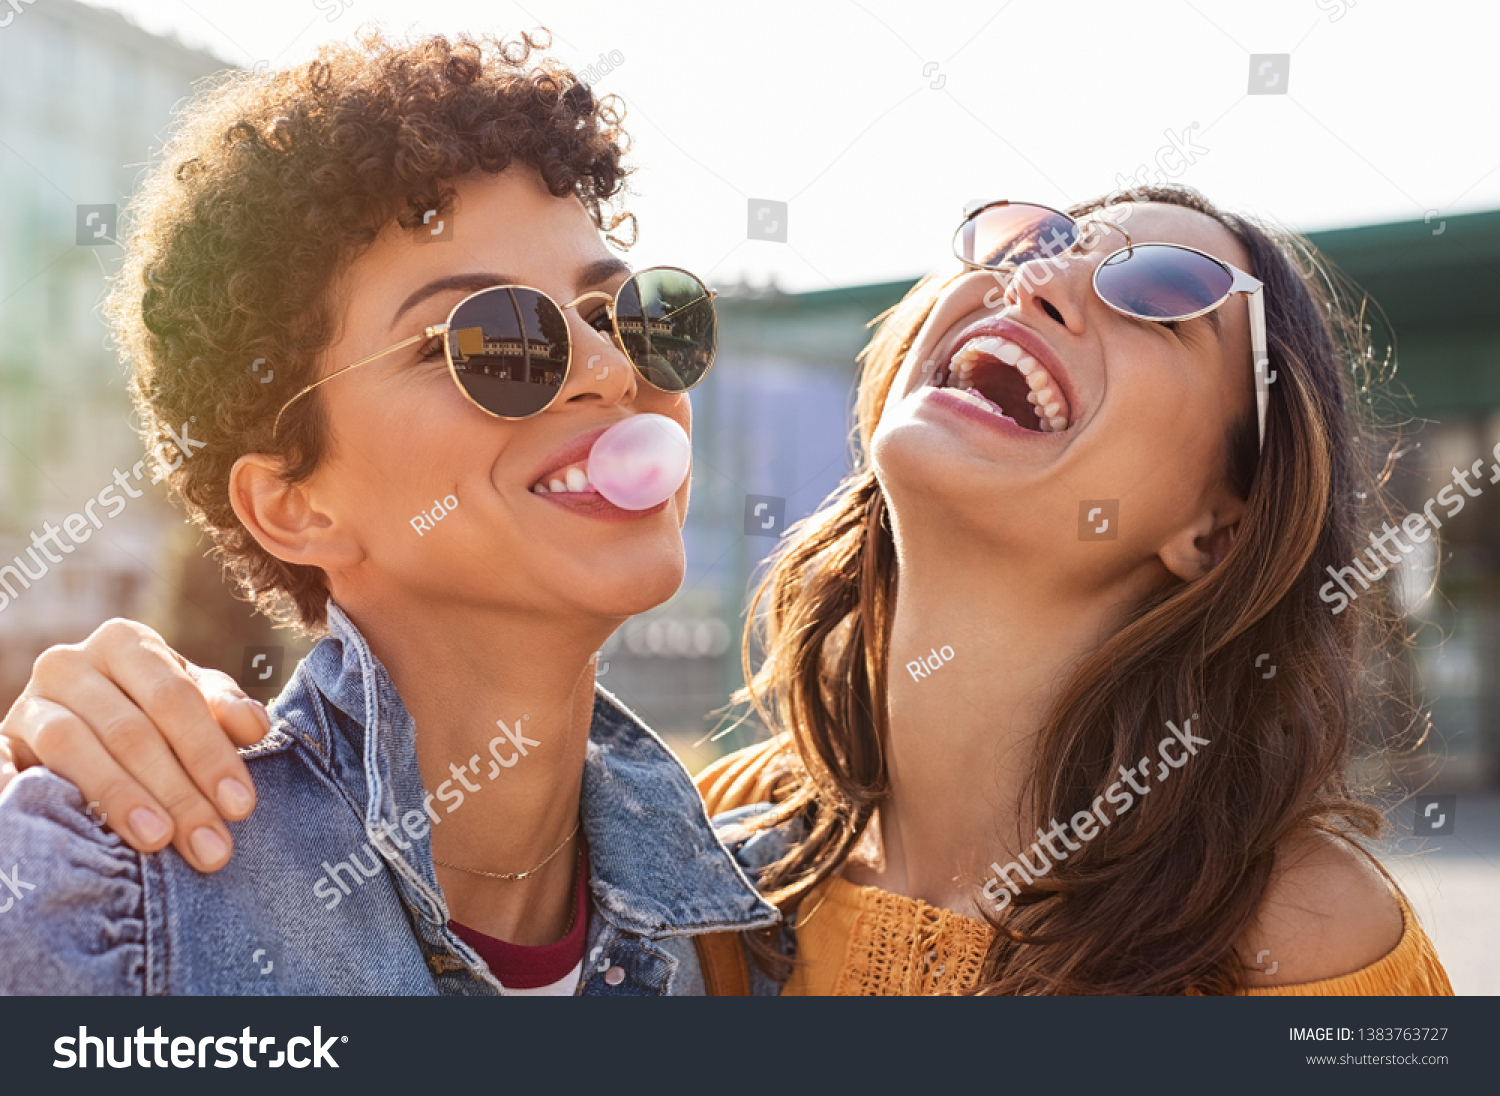 Young latin woman laughing while friend inflating bubble gum. Closeup face of multiethnic friends enjoying outdoor street. Brazilian girl laughing and blowing chewing gum with friend embracing her. #1383763727